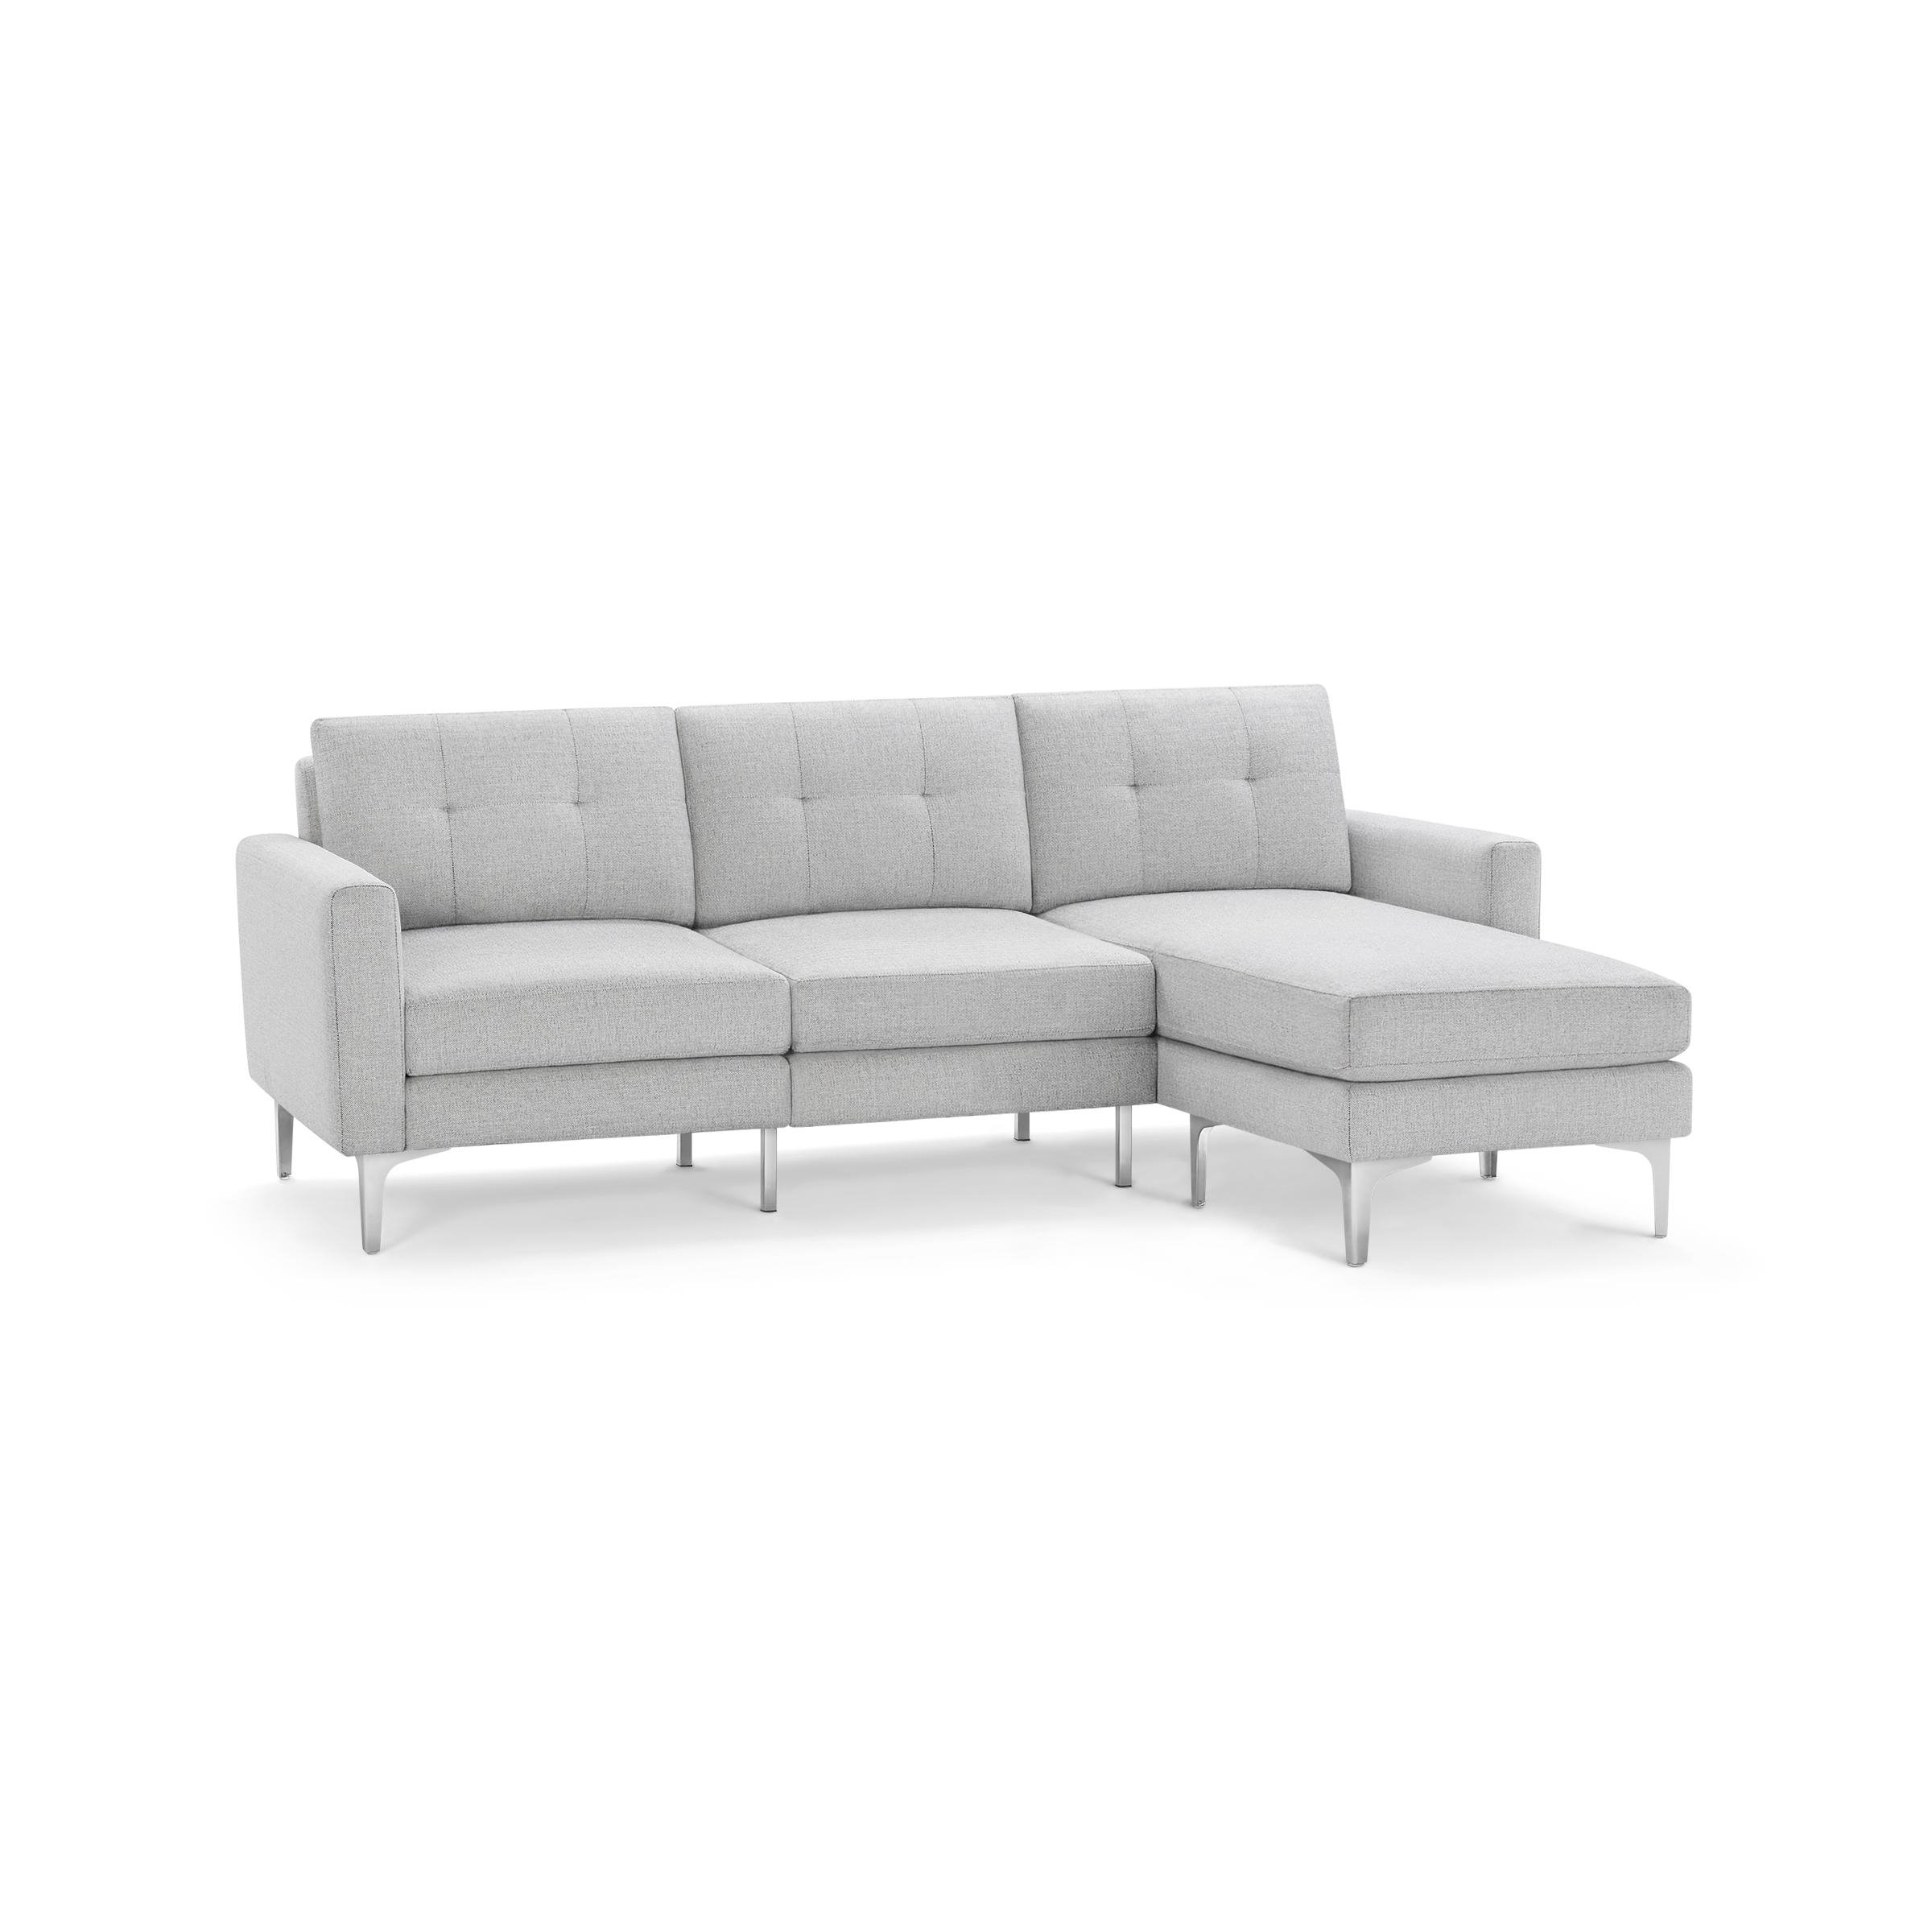 The Block Nomad Sectional Sofa in Crushed Gravel - Image 1